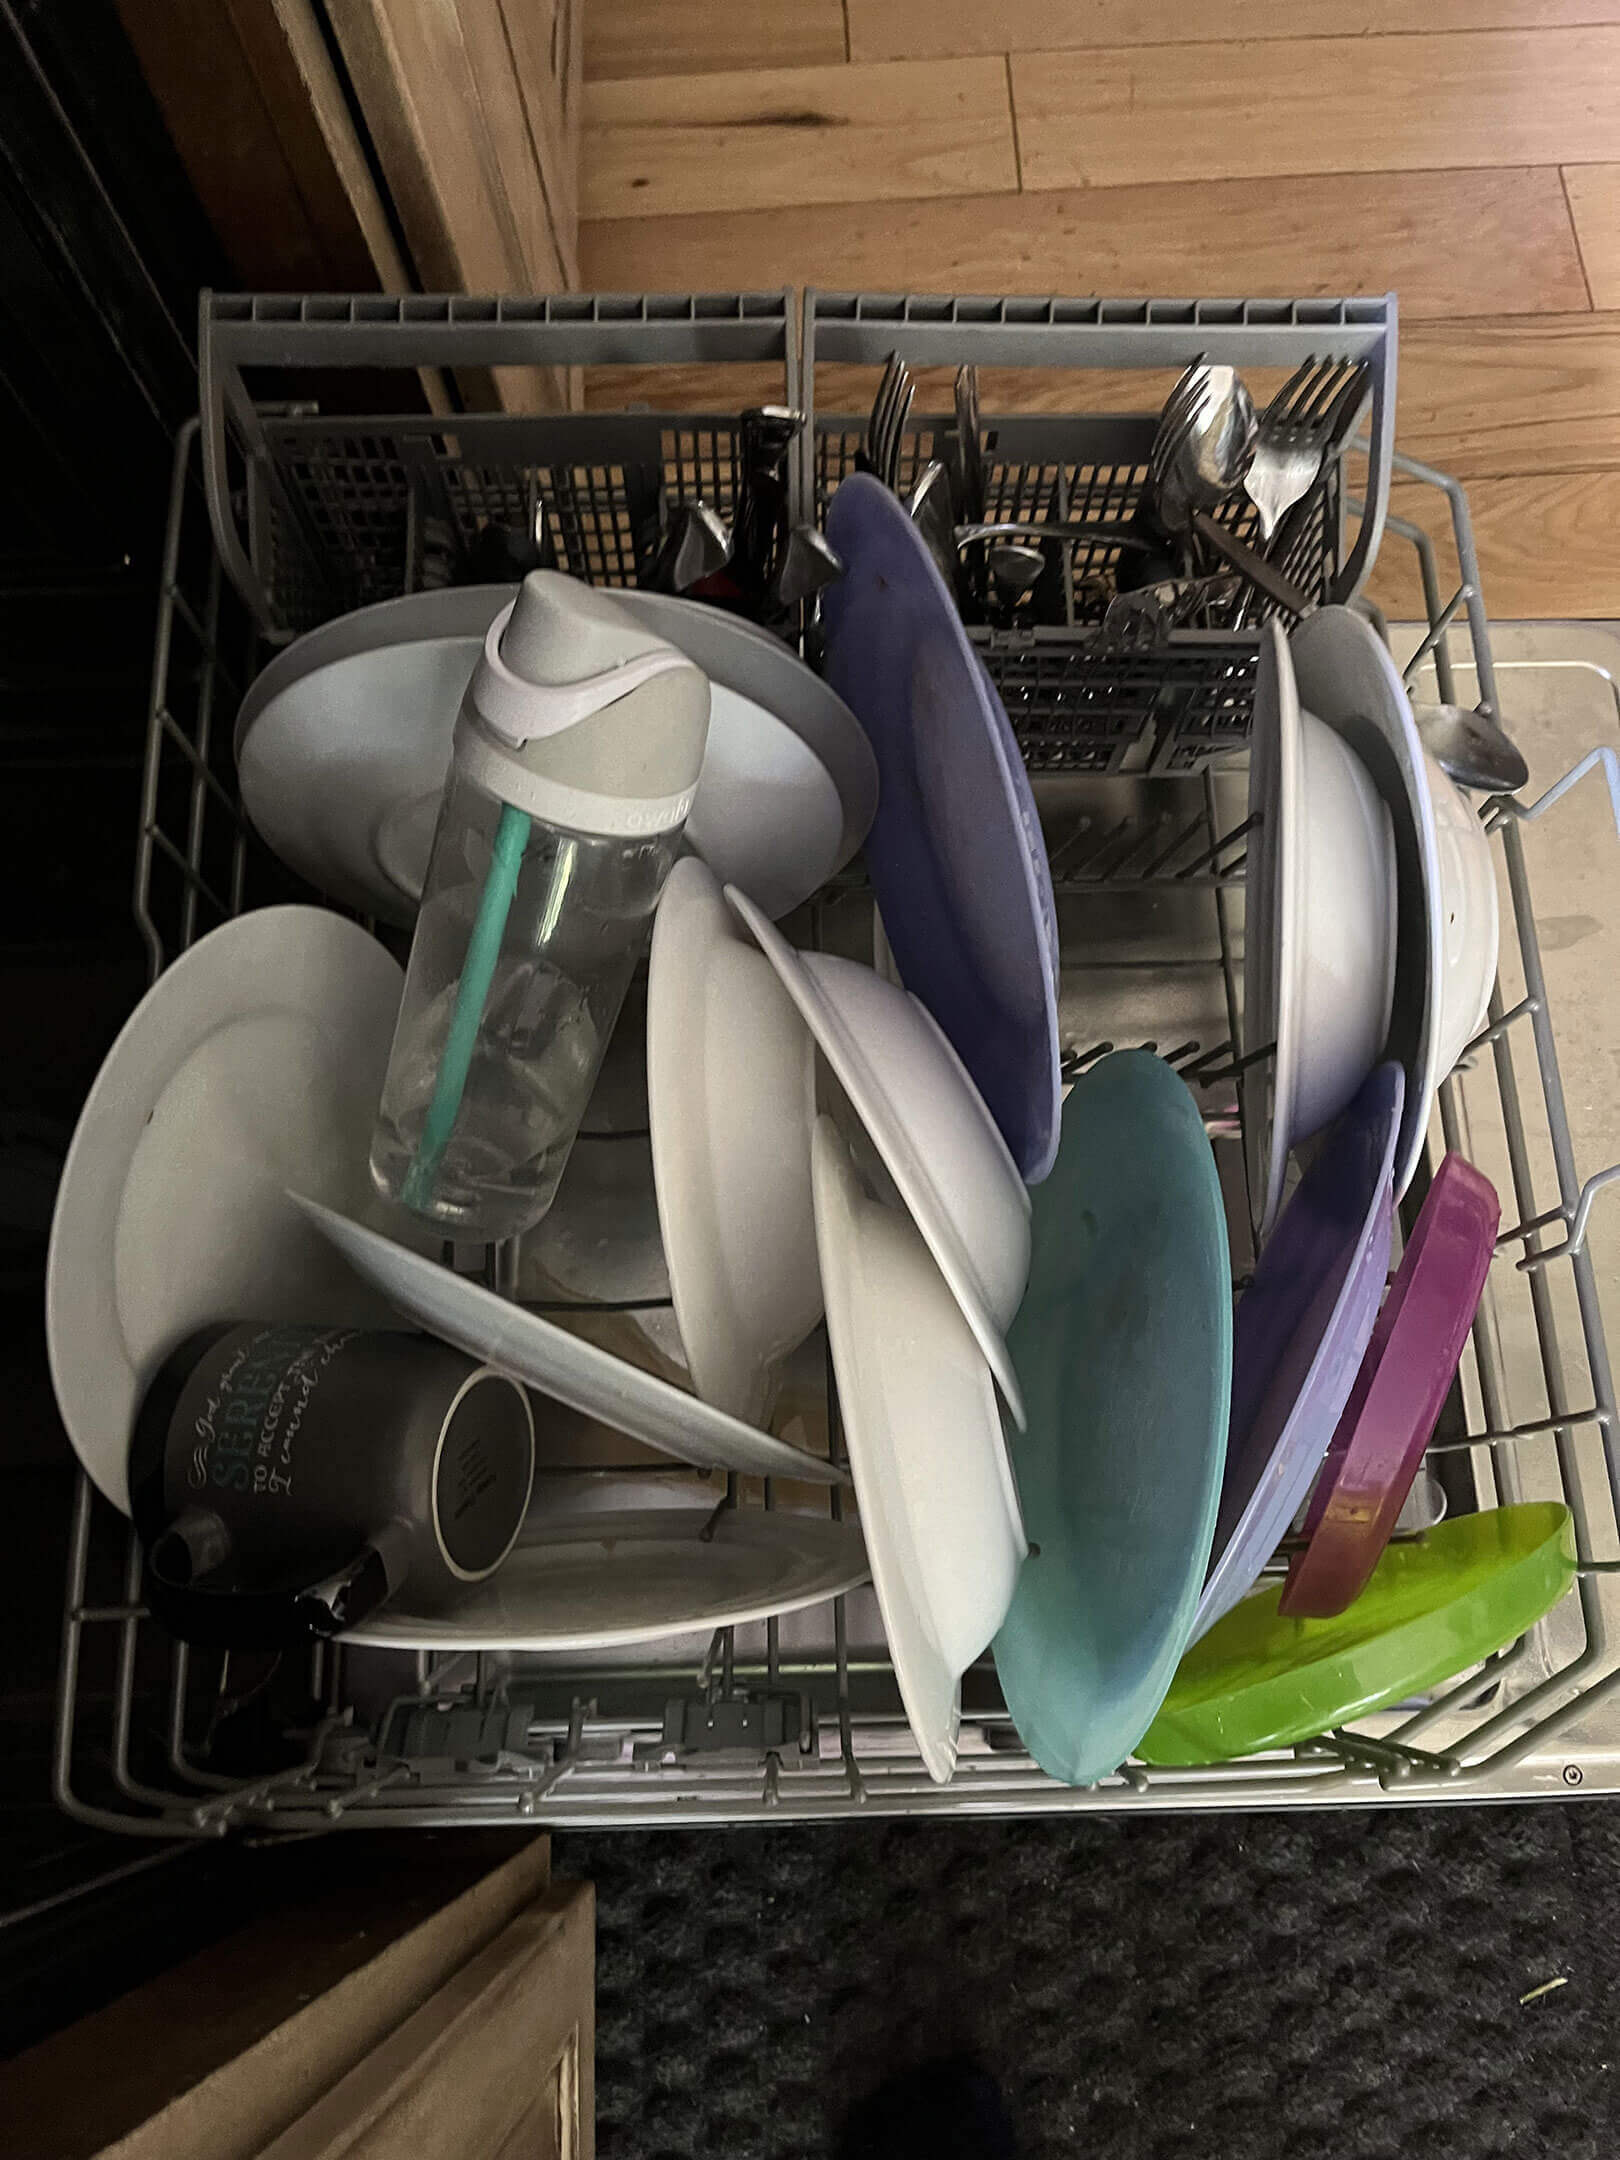 dirty dishes